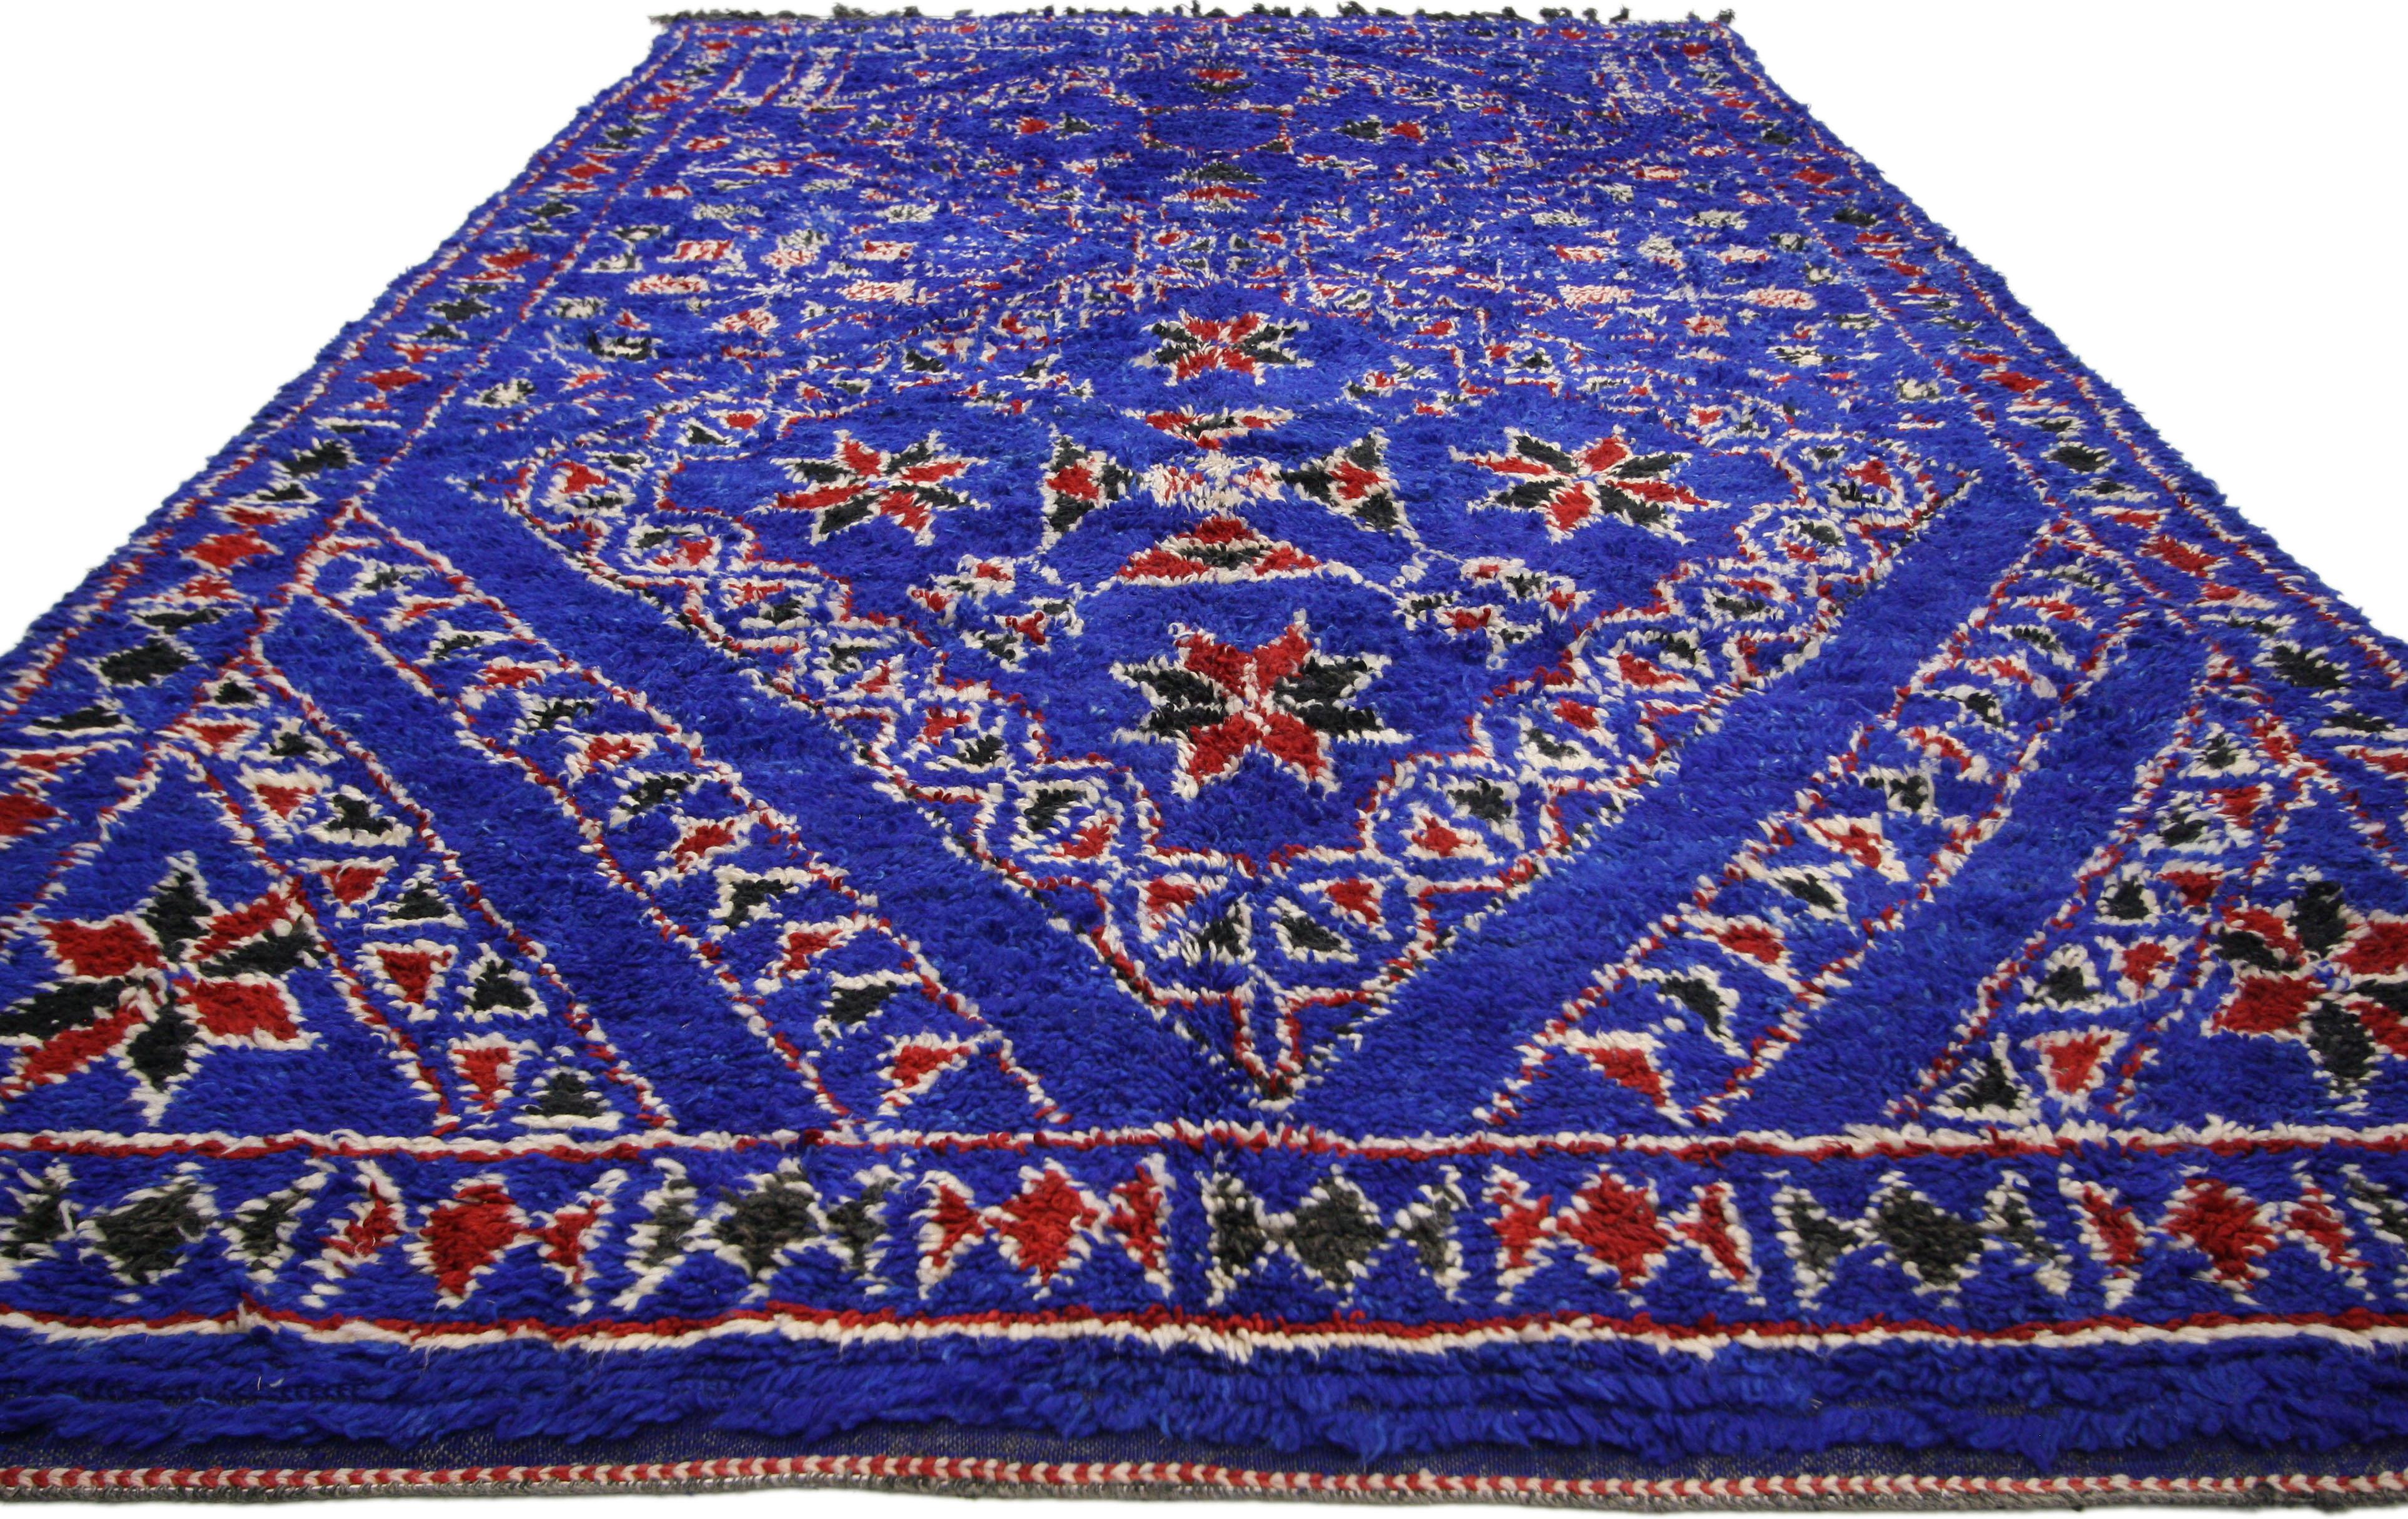 Hand-Knotted Vintage Indigo Beni Mguild Rug with Tribal Style, Berber Blue Moroccan Rug